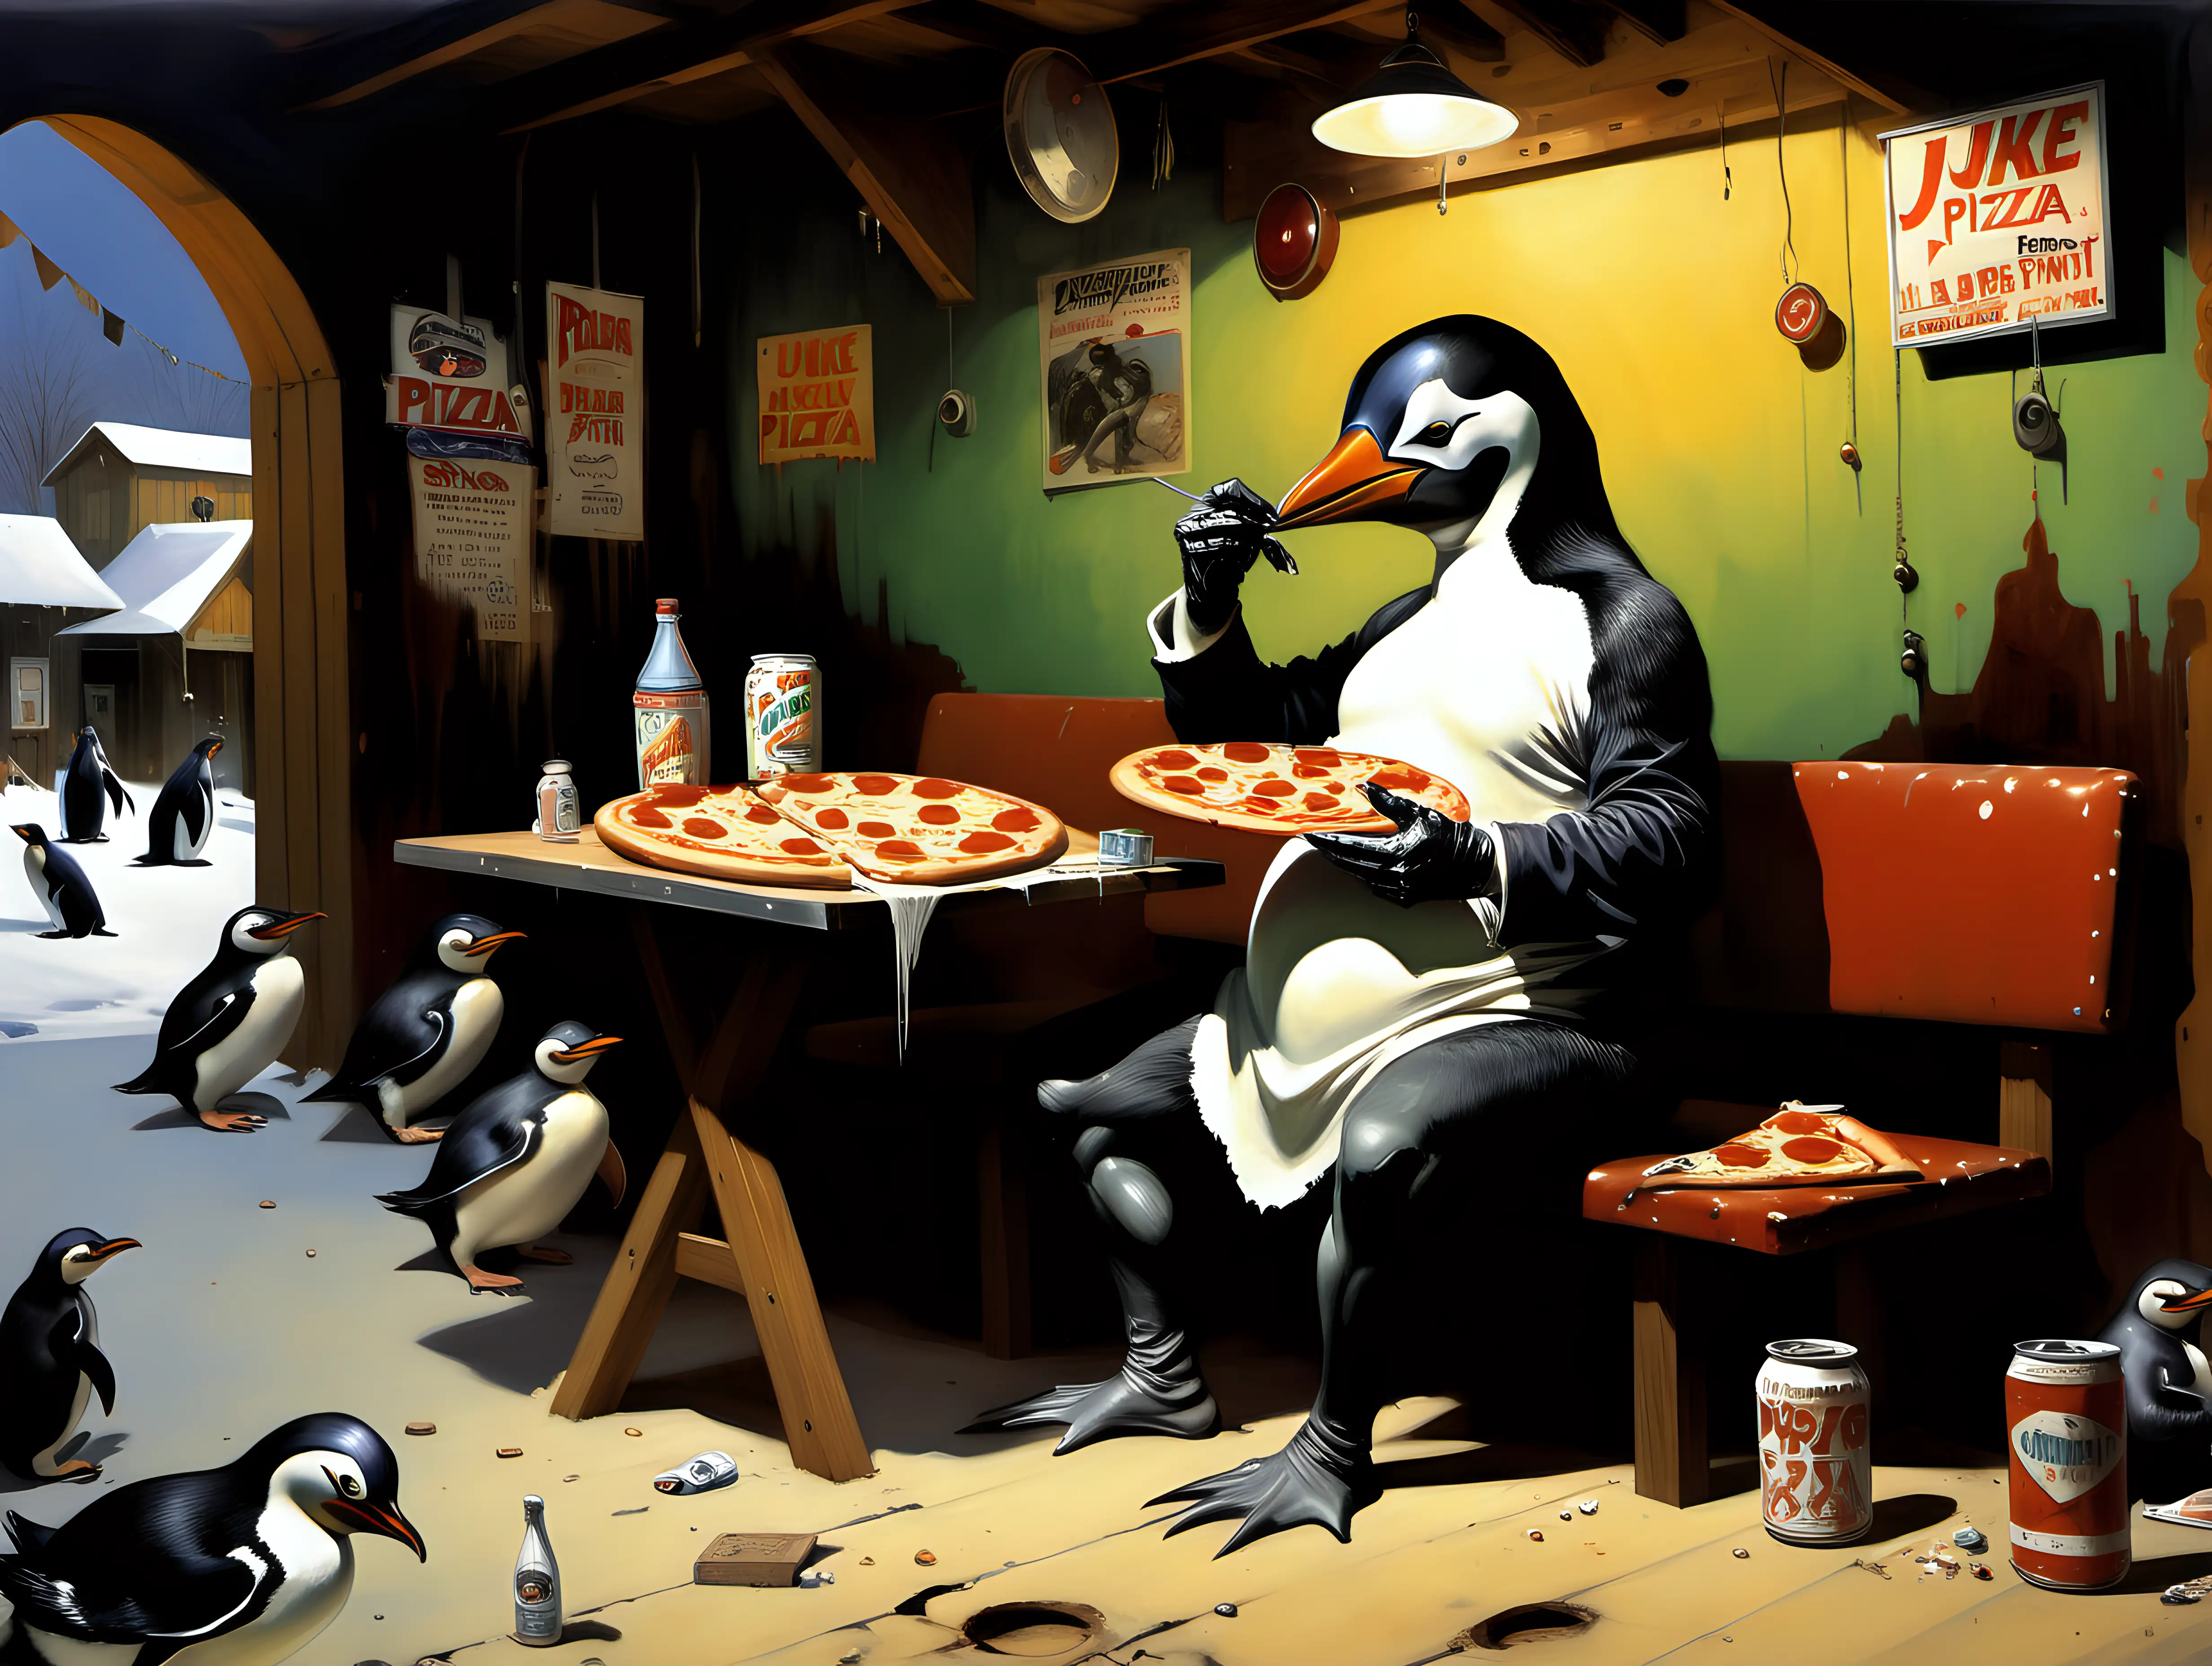 The Penquin eating pizza in a juke joint Frank Frazetta style painting